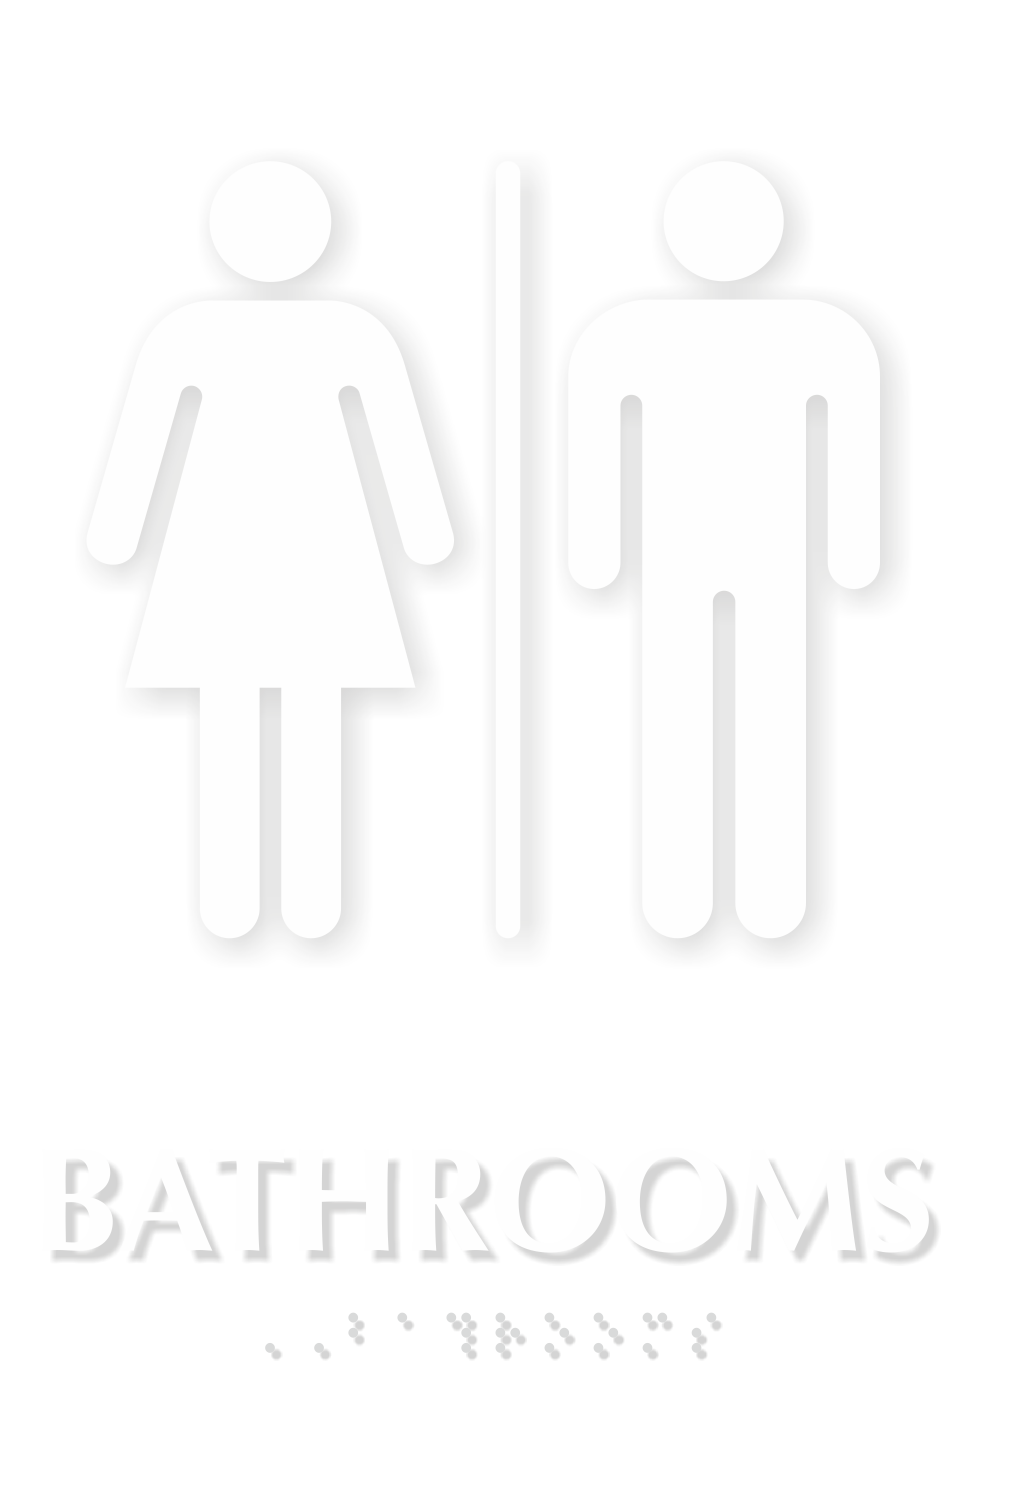 Unisex Bathrooms TactileTouch Braille Sign